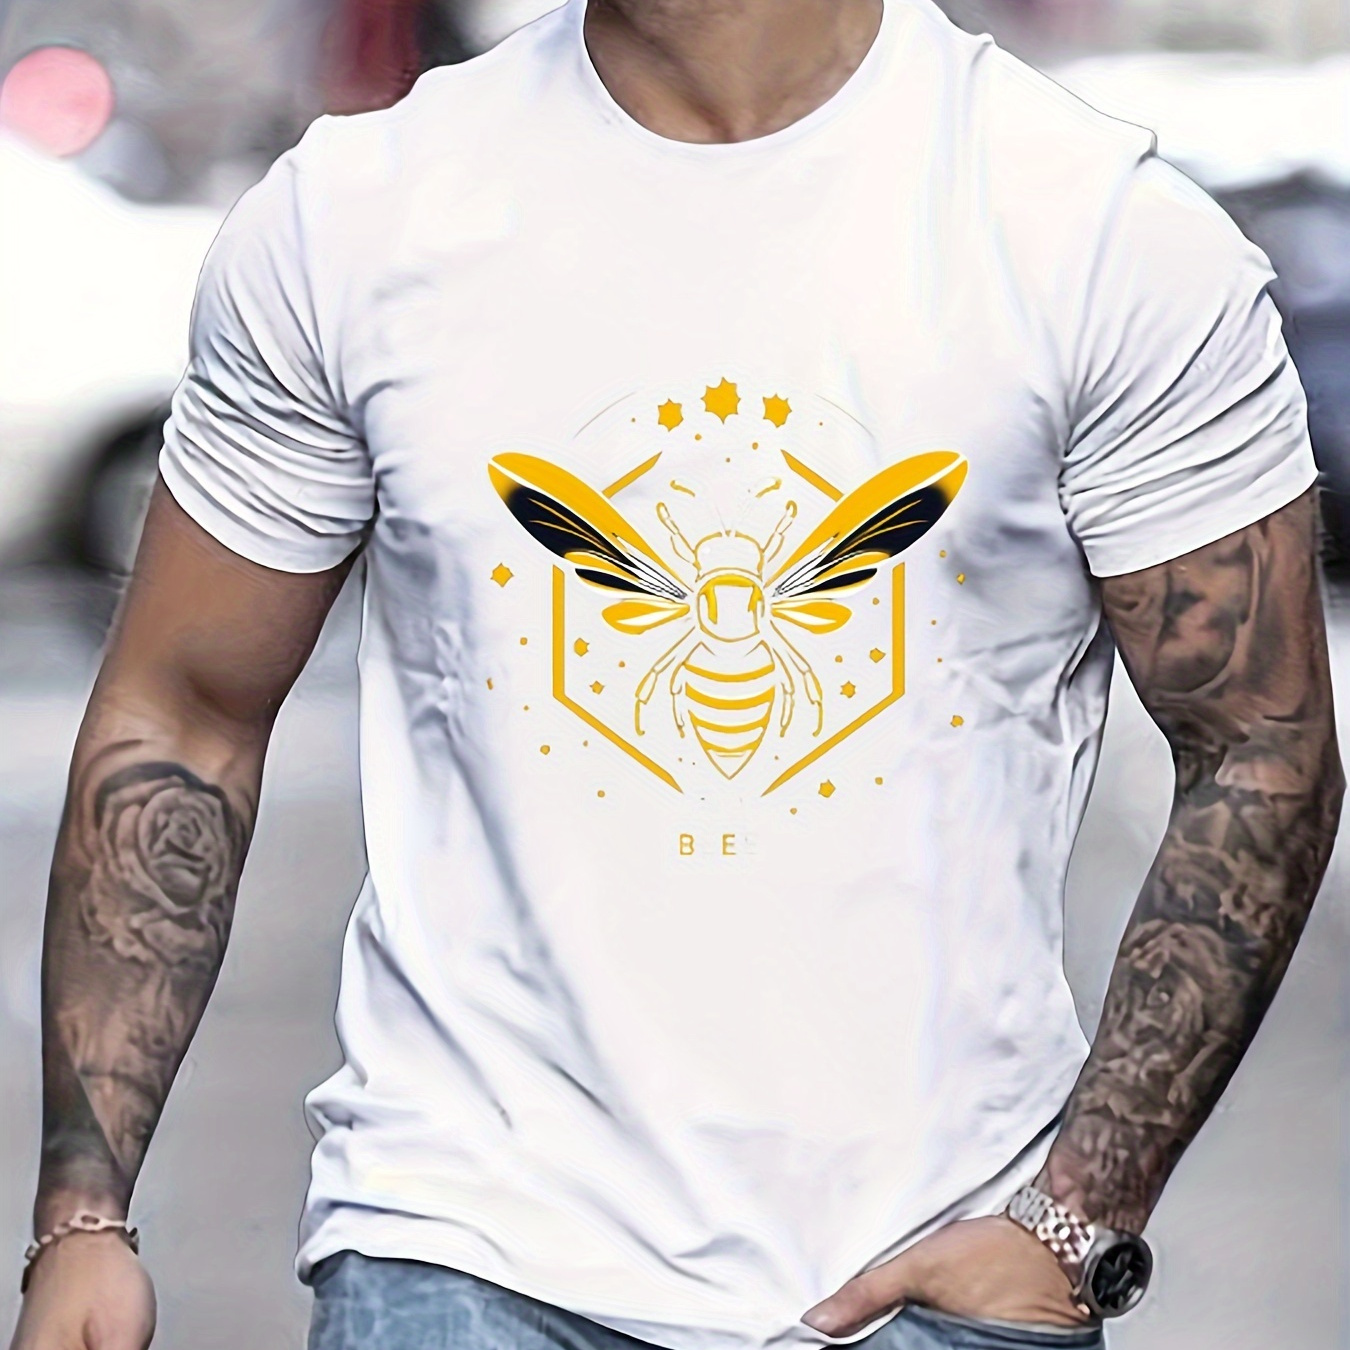 

Bee Print Tees For Men, Casual Crew Neck Short Sleeve T-shirt, Comfortable Breathable T-shirt For All Seasons